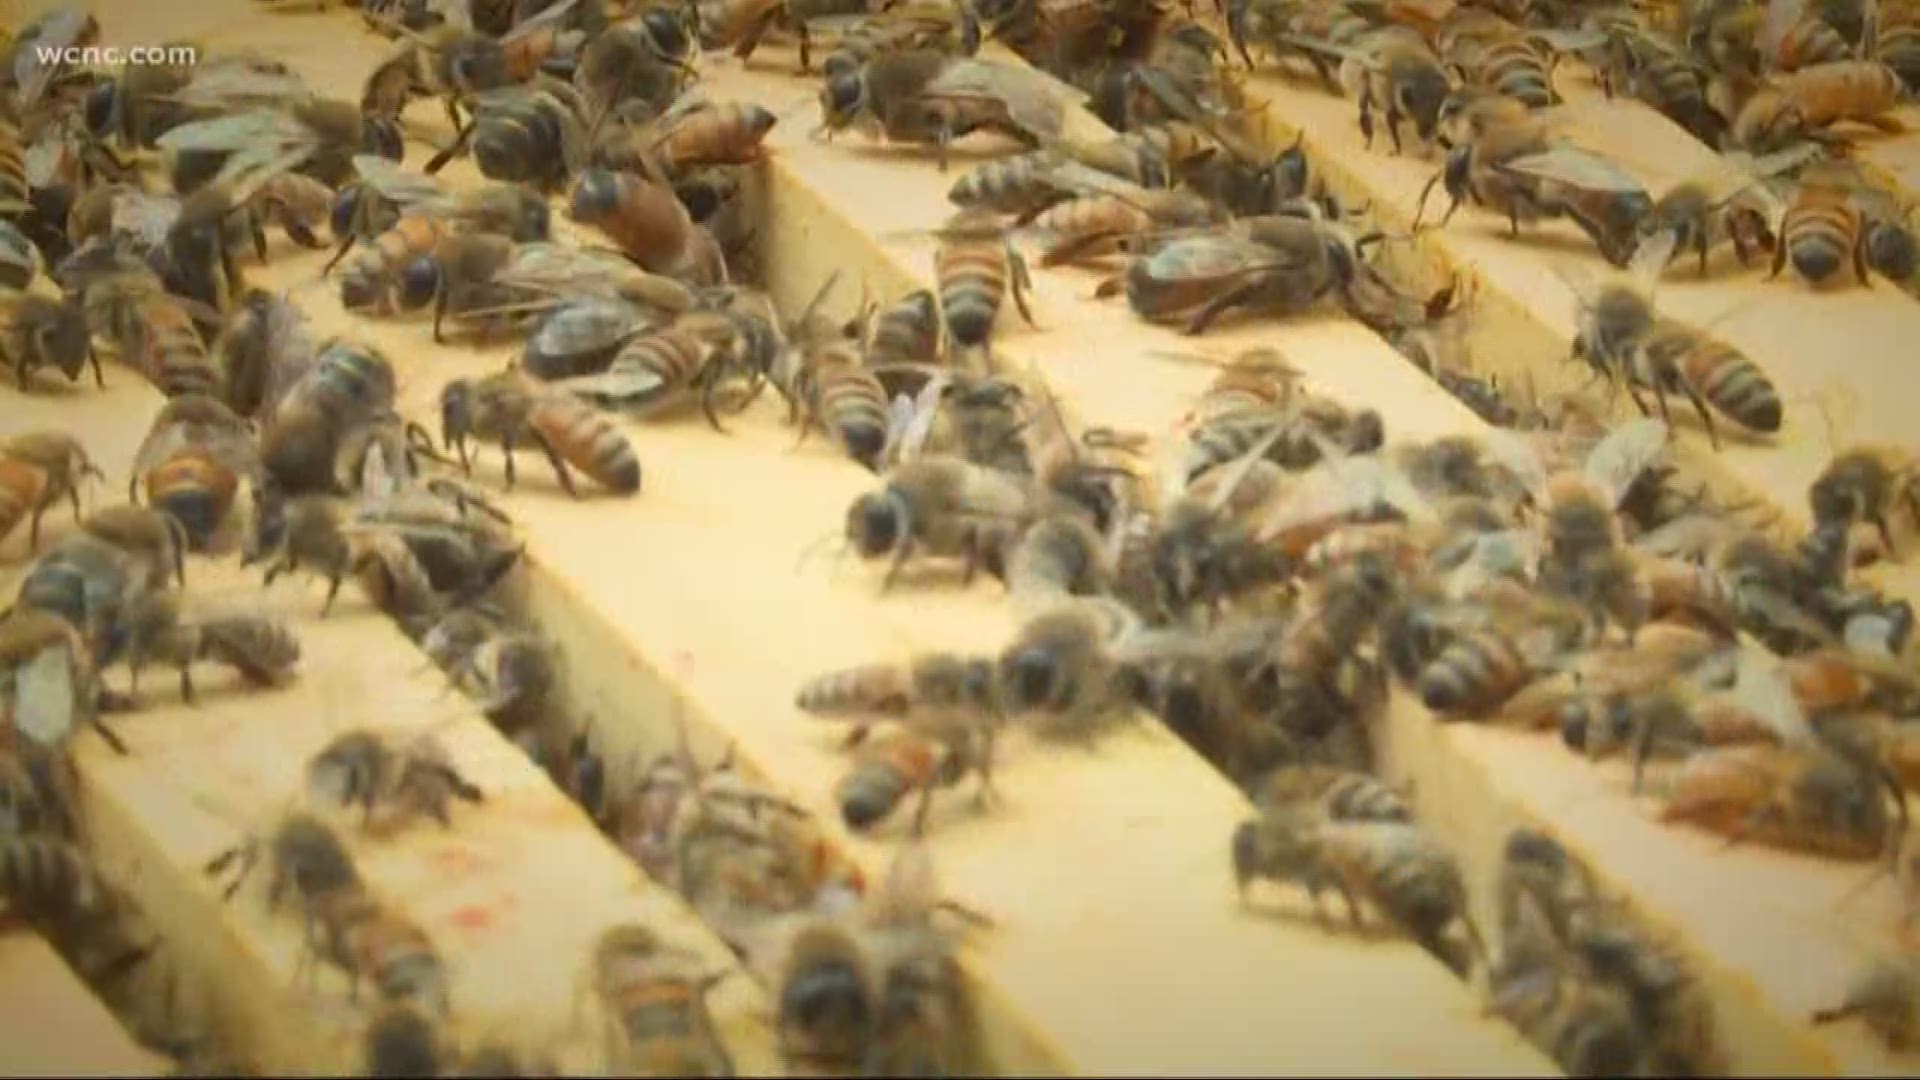 Beekeeper encouraged by swarm of bees